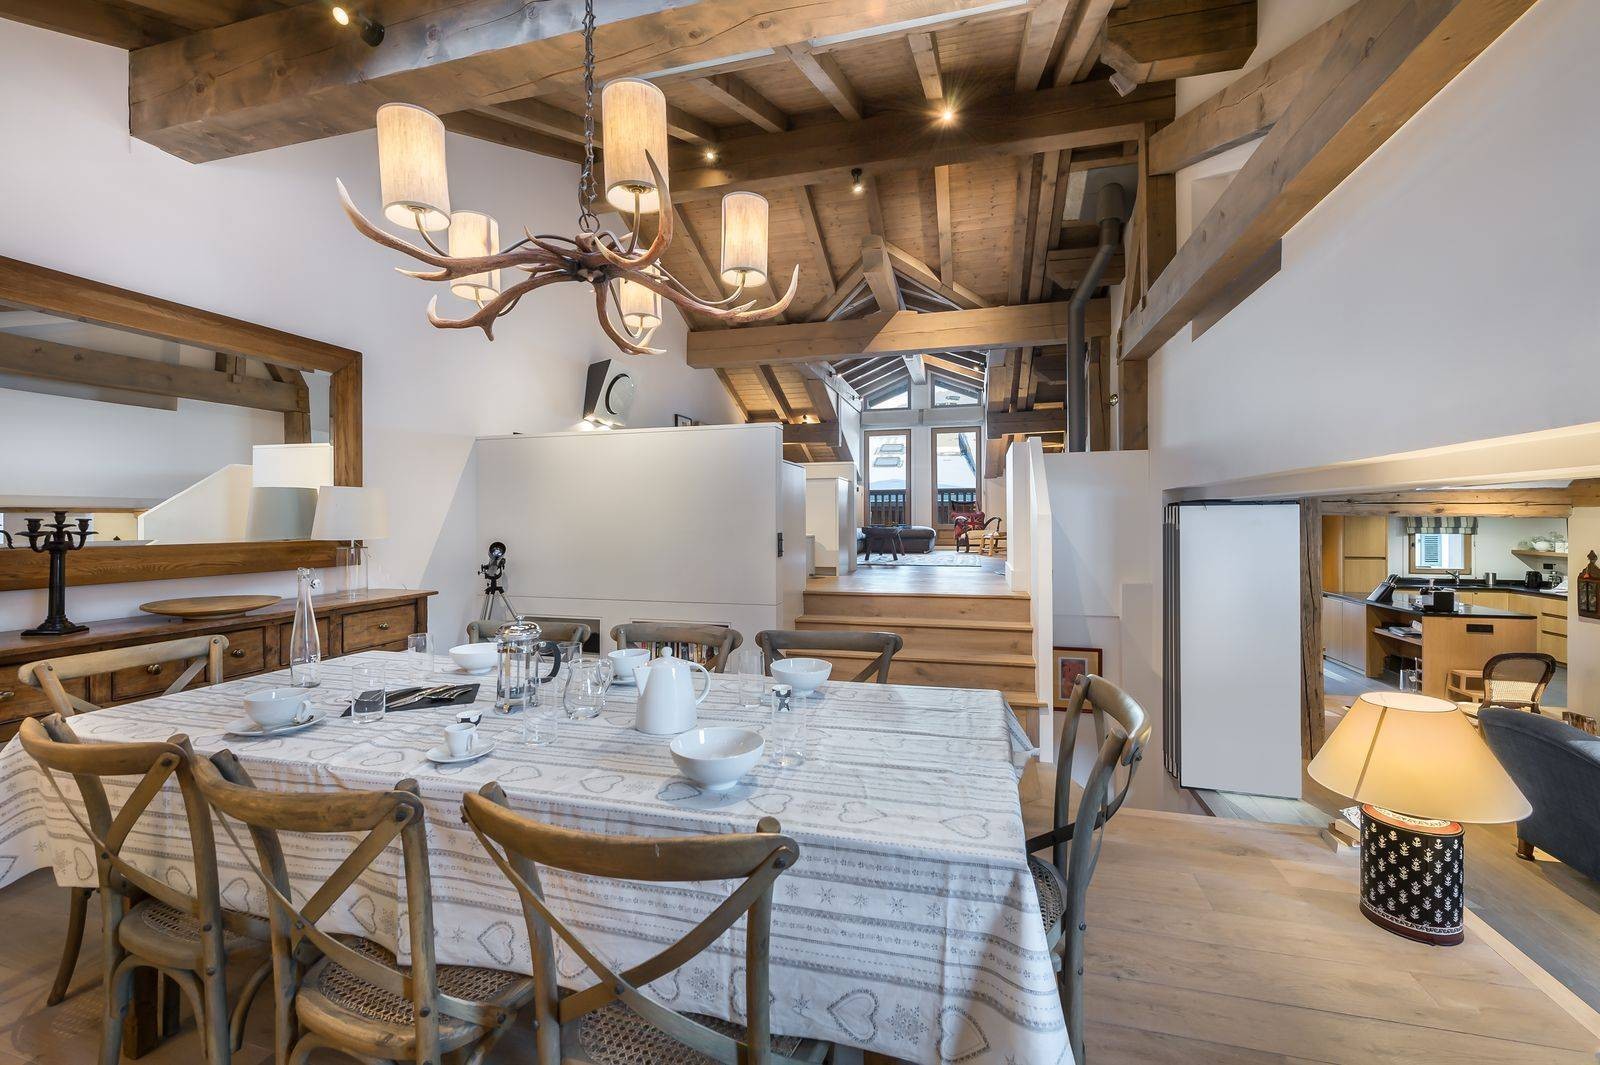 Courchevel 1300 Location Chalet Luxe Nibate Salle A Manger 2